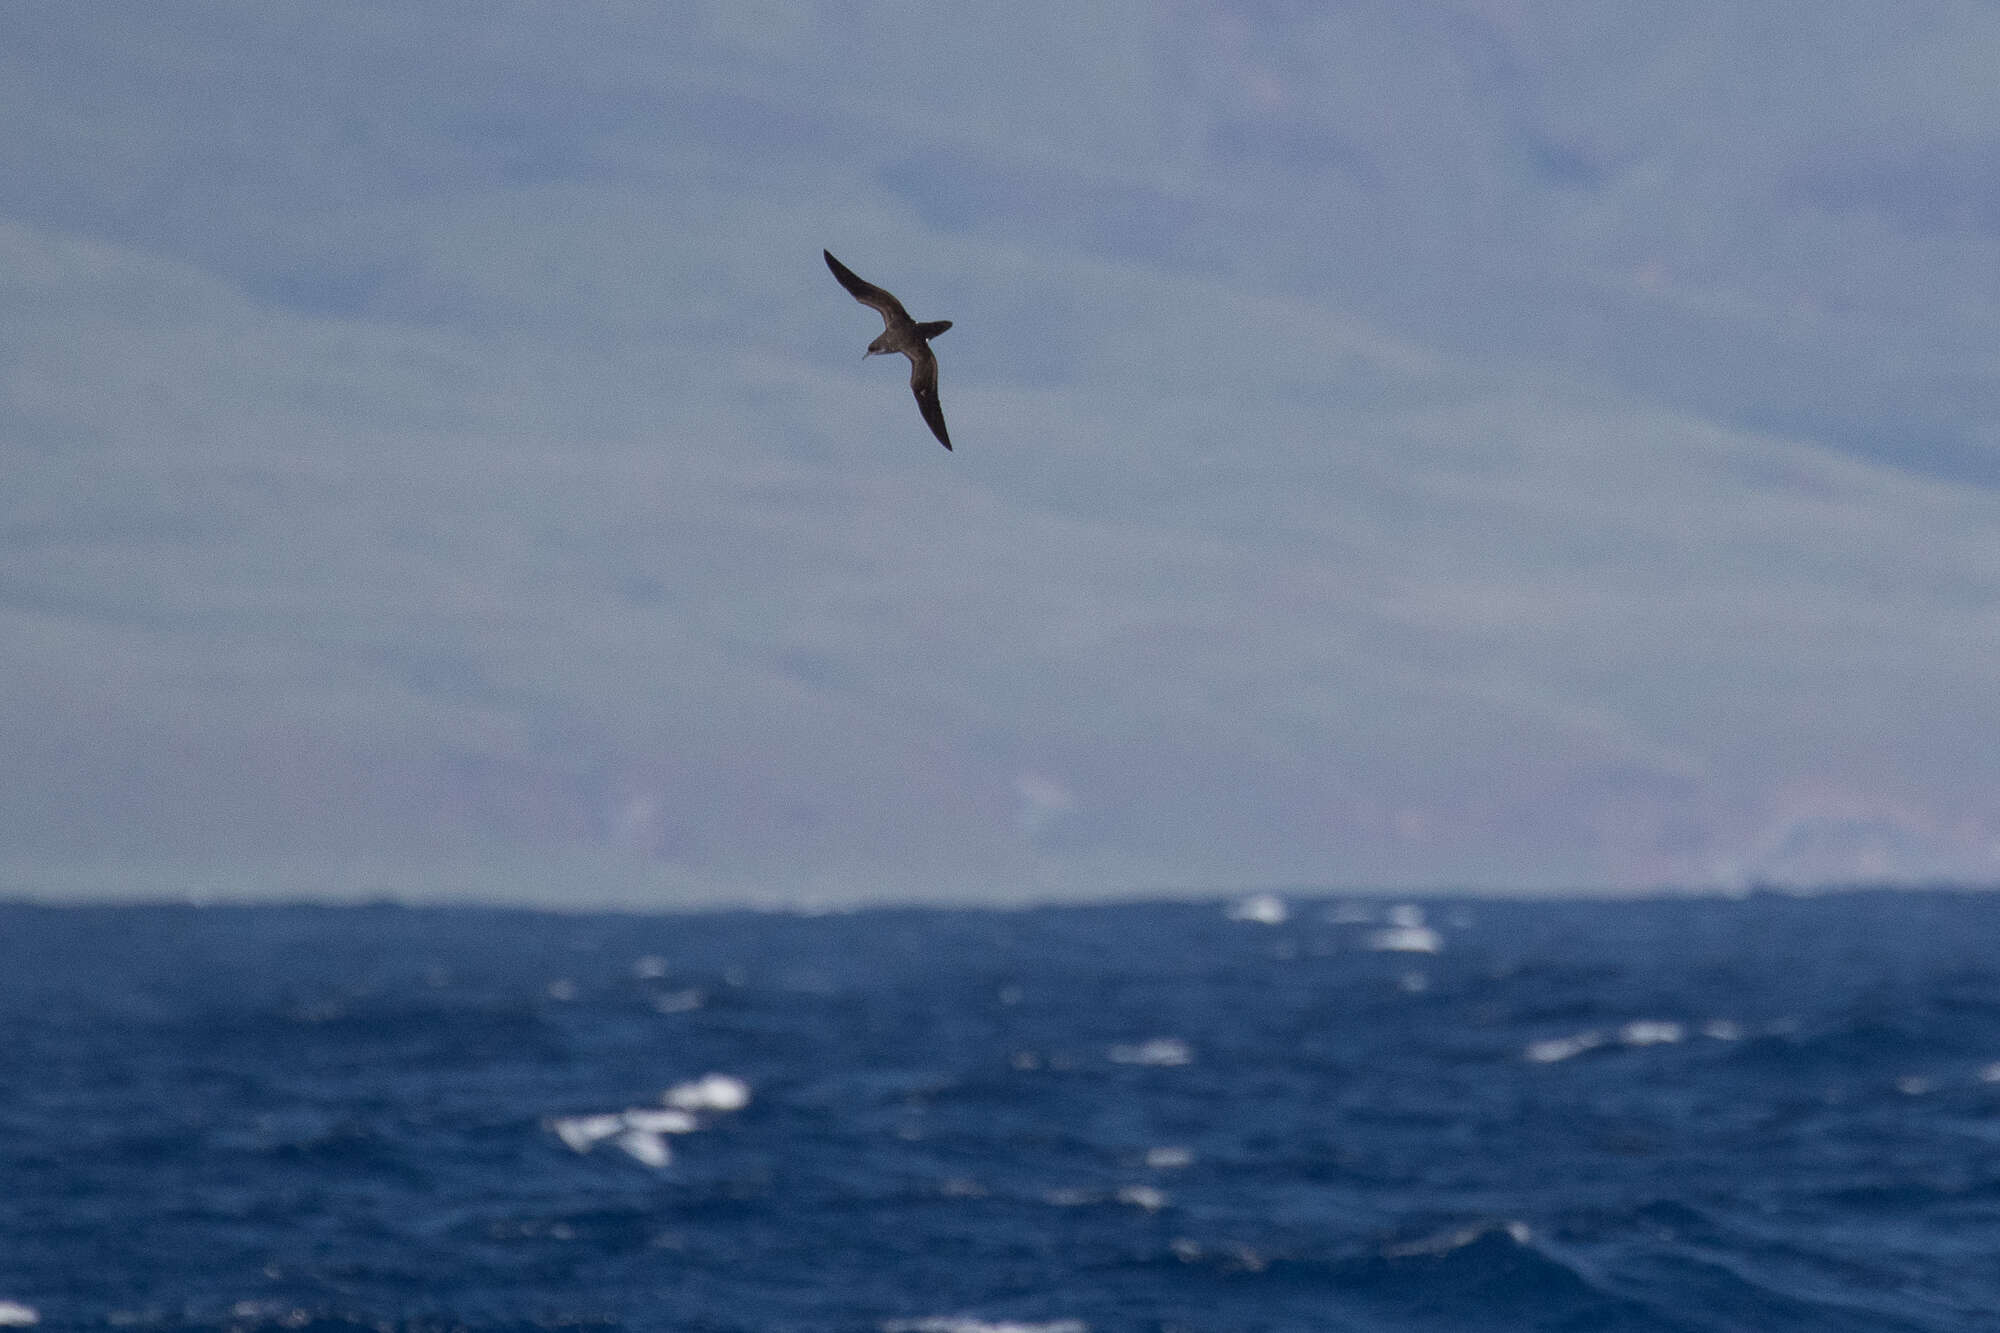 Image of Townsend's Shearwater